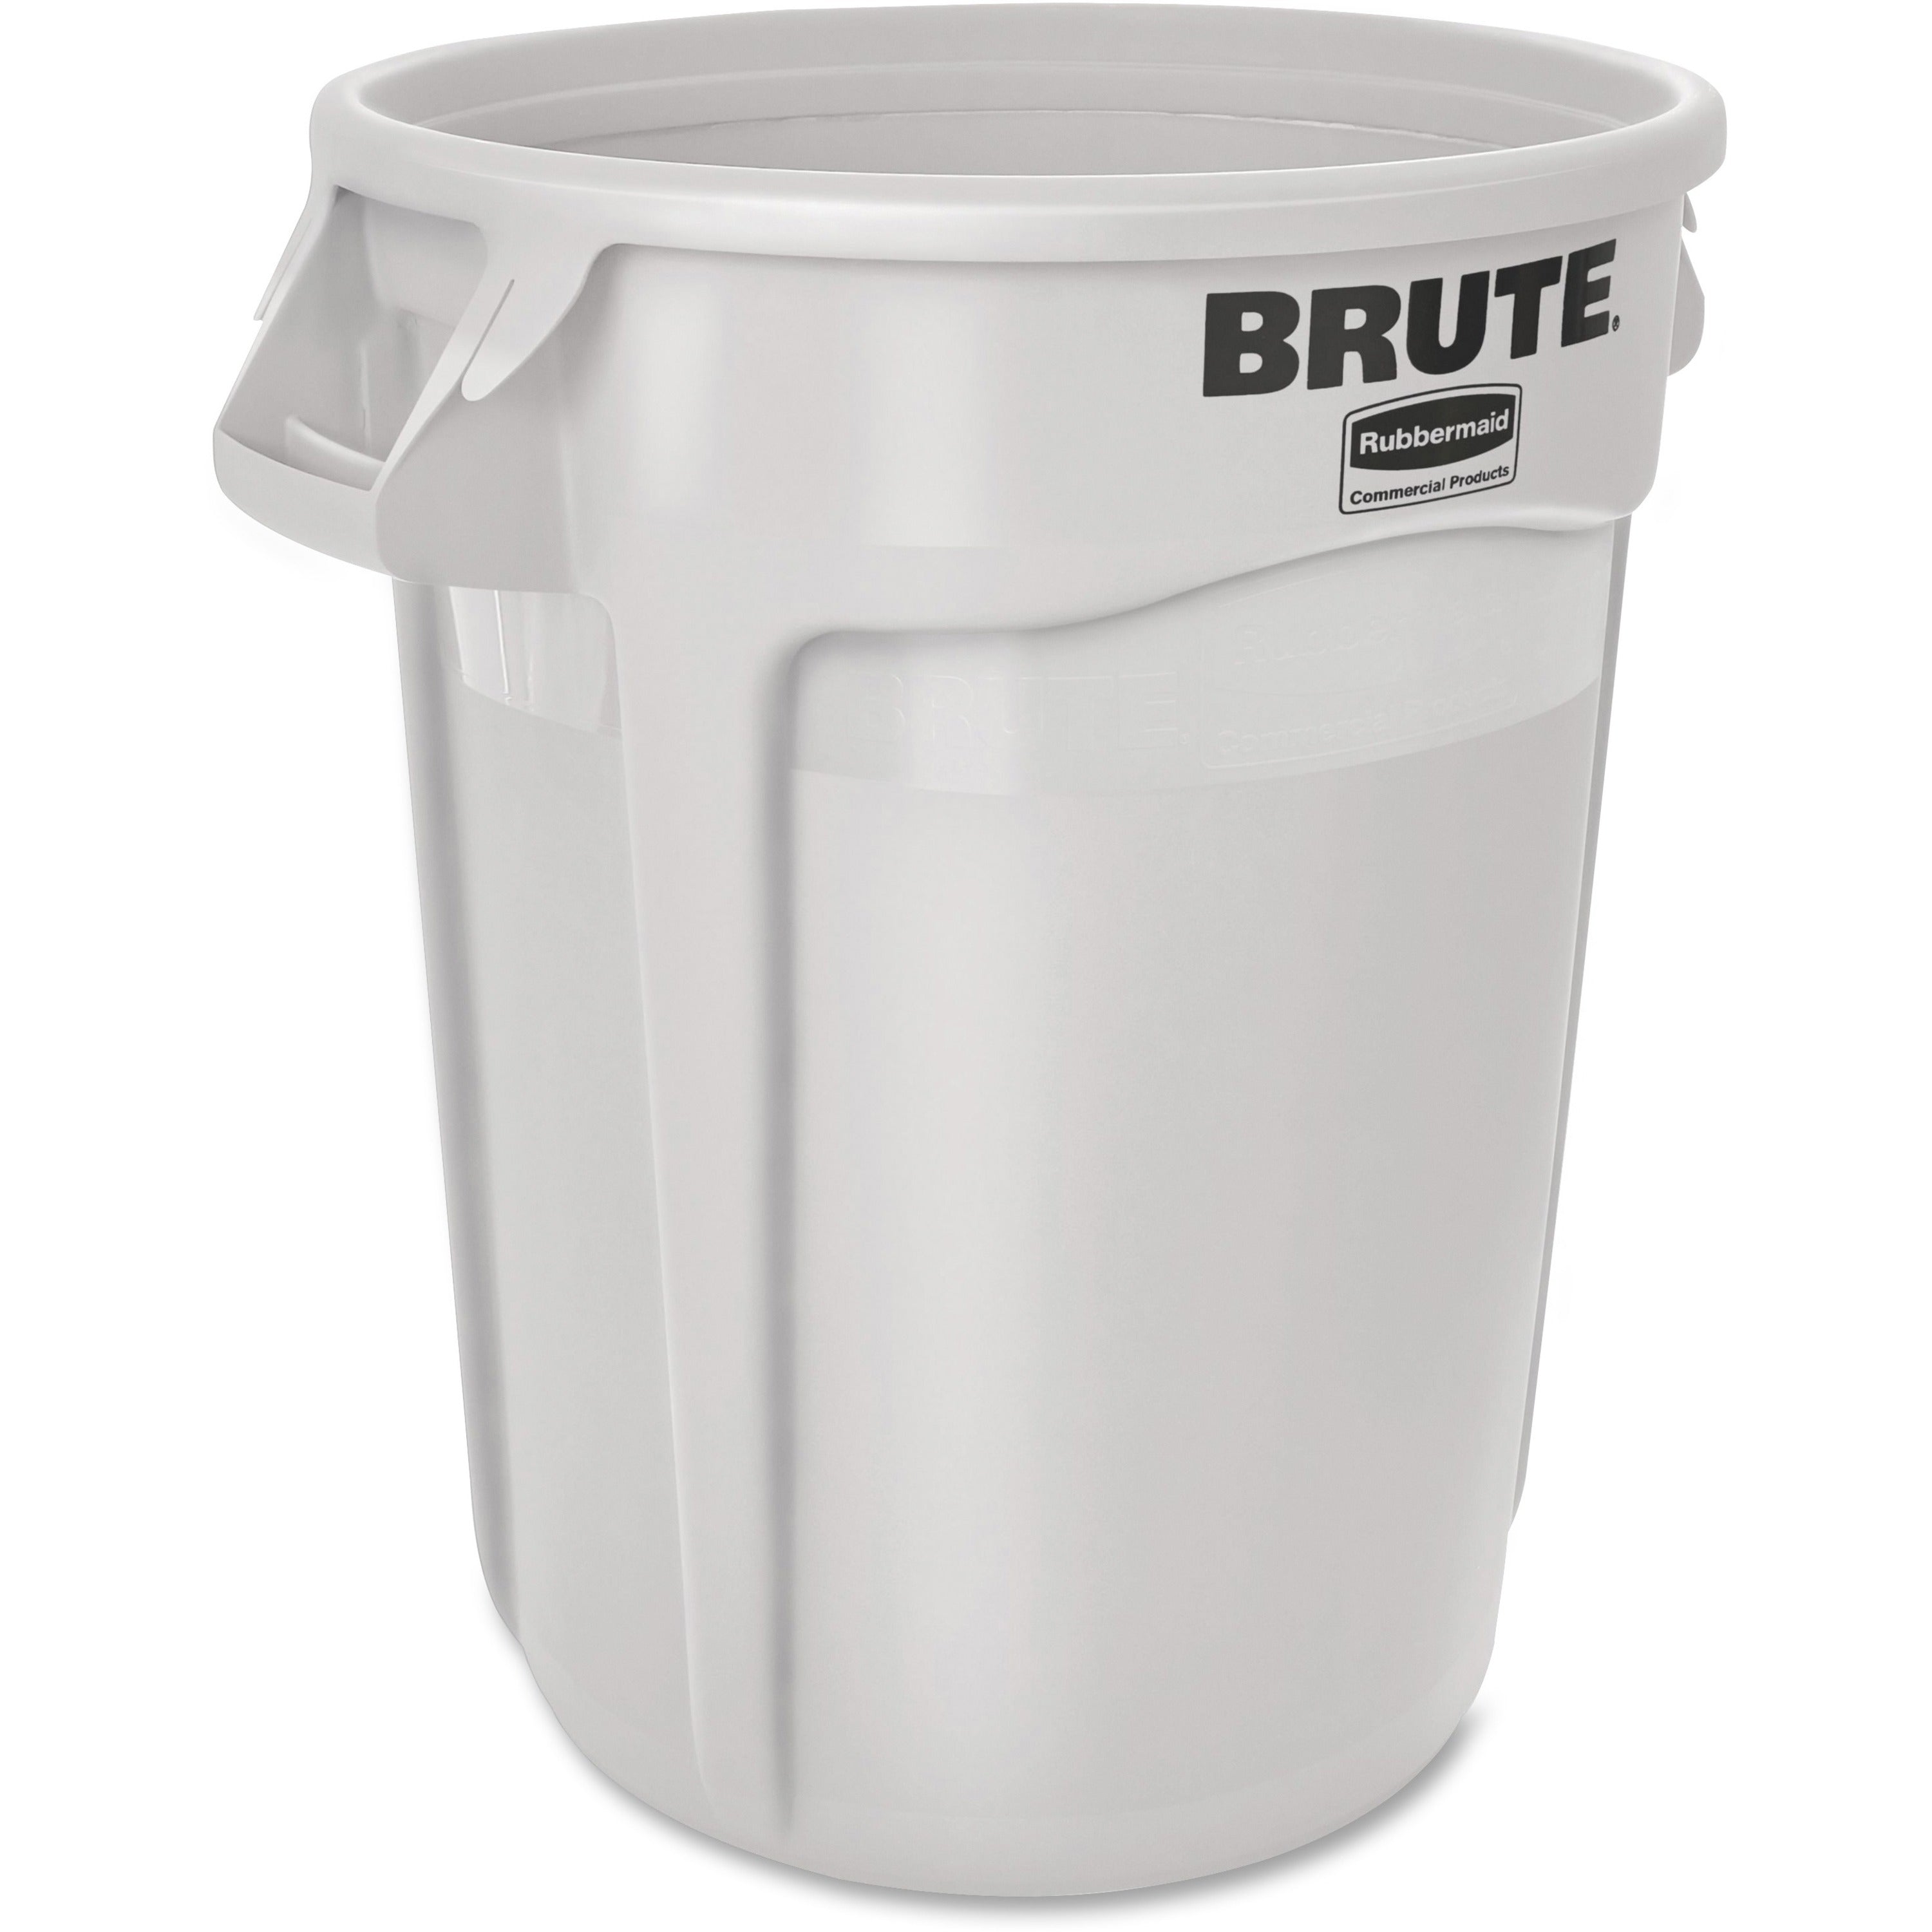 rubbermaid-commercial-brute-32-gallon-vented-containers-32-gal-capacity-round-handle-uv-coated-crush-resistant-heavy-duty-tear-resistant-vented-273-height-x-219-diameter-plastic-white-6-carton_rcp2632whict - 1